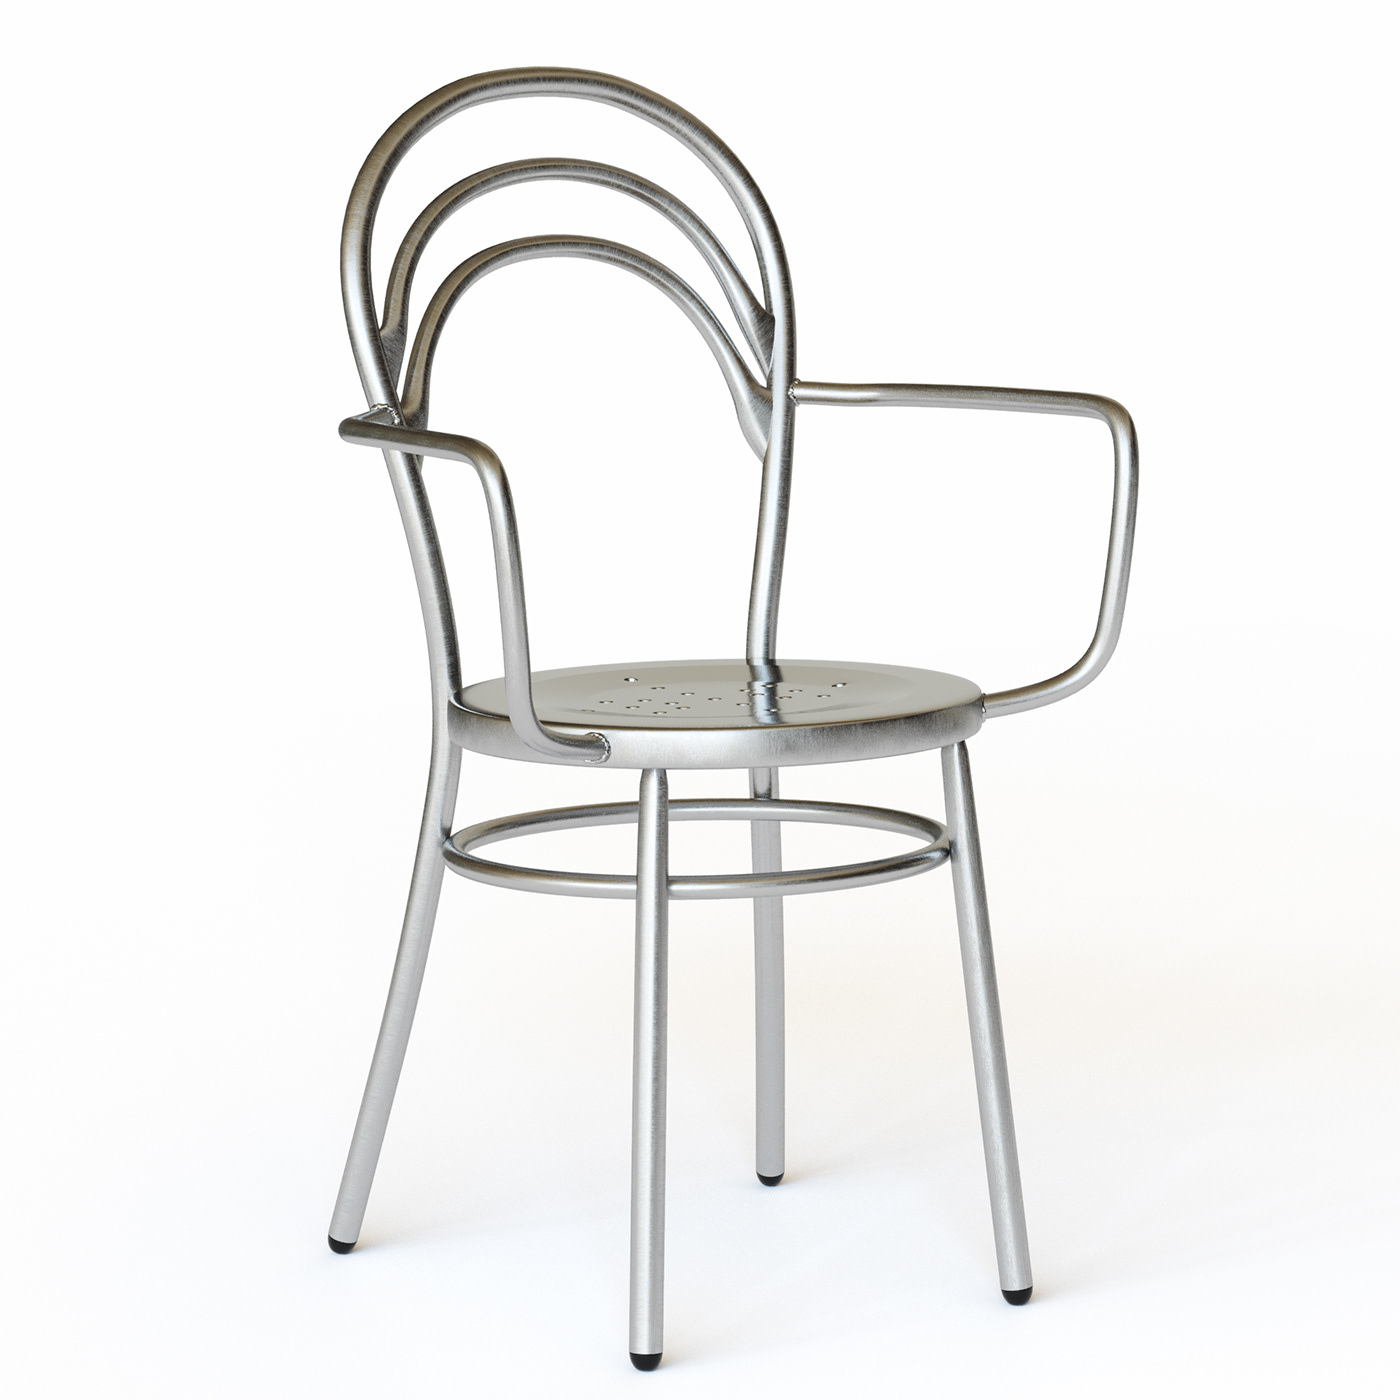 armchair visualization 3ds max modeling Render Tivoli furniture design  product